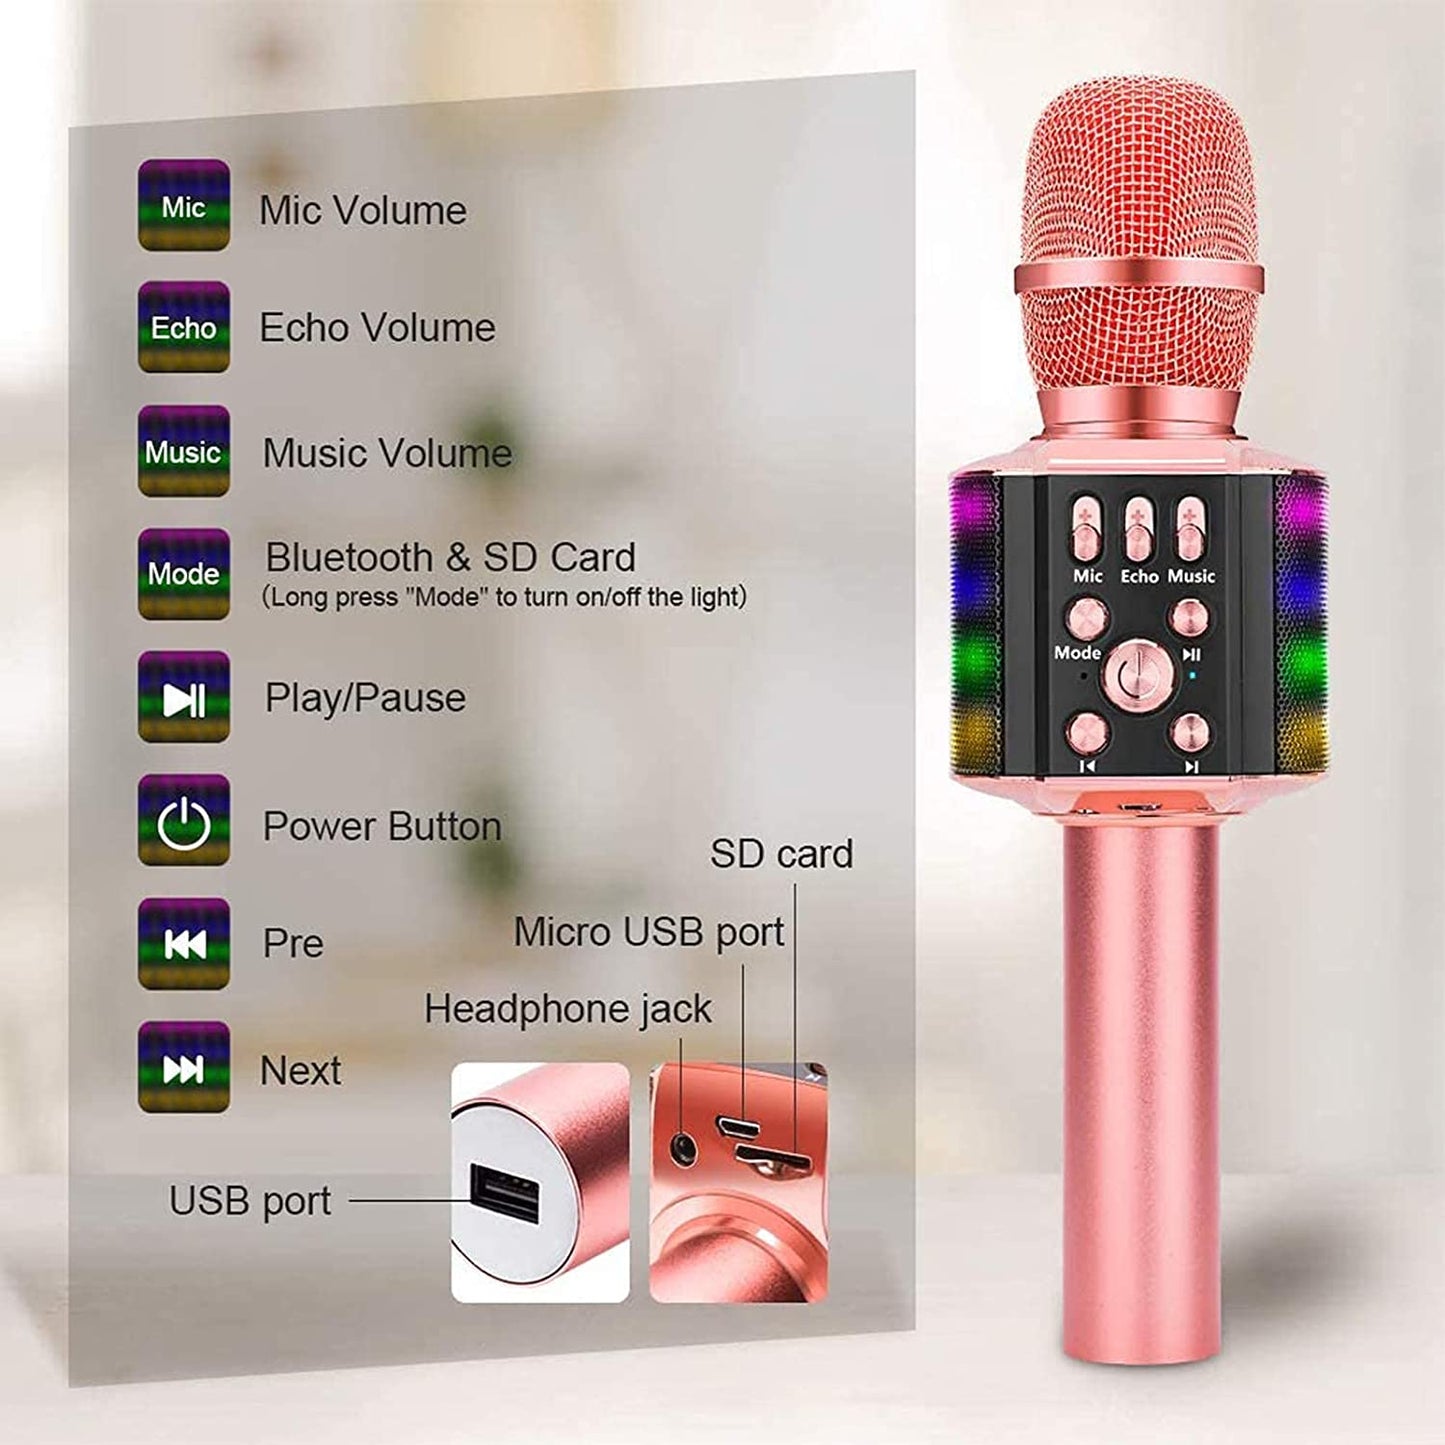 BONAOK Wireless Bluetooth Karaoke Microphone with controllable LED Lights, 4 in 1 Portable Karaoke Machine Speaker for Android/iPhone/PC (Rose Gold)